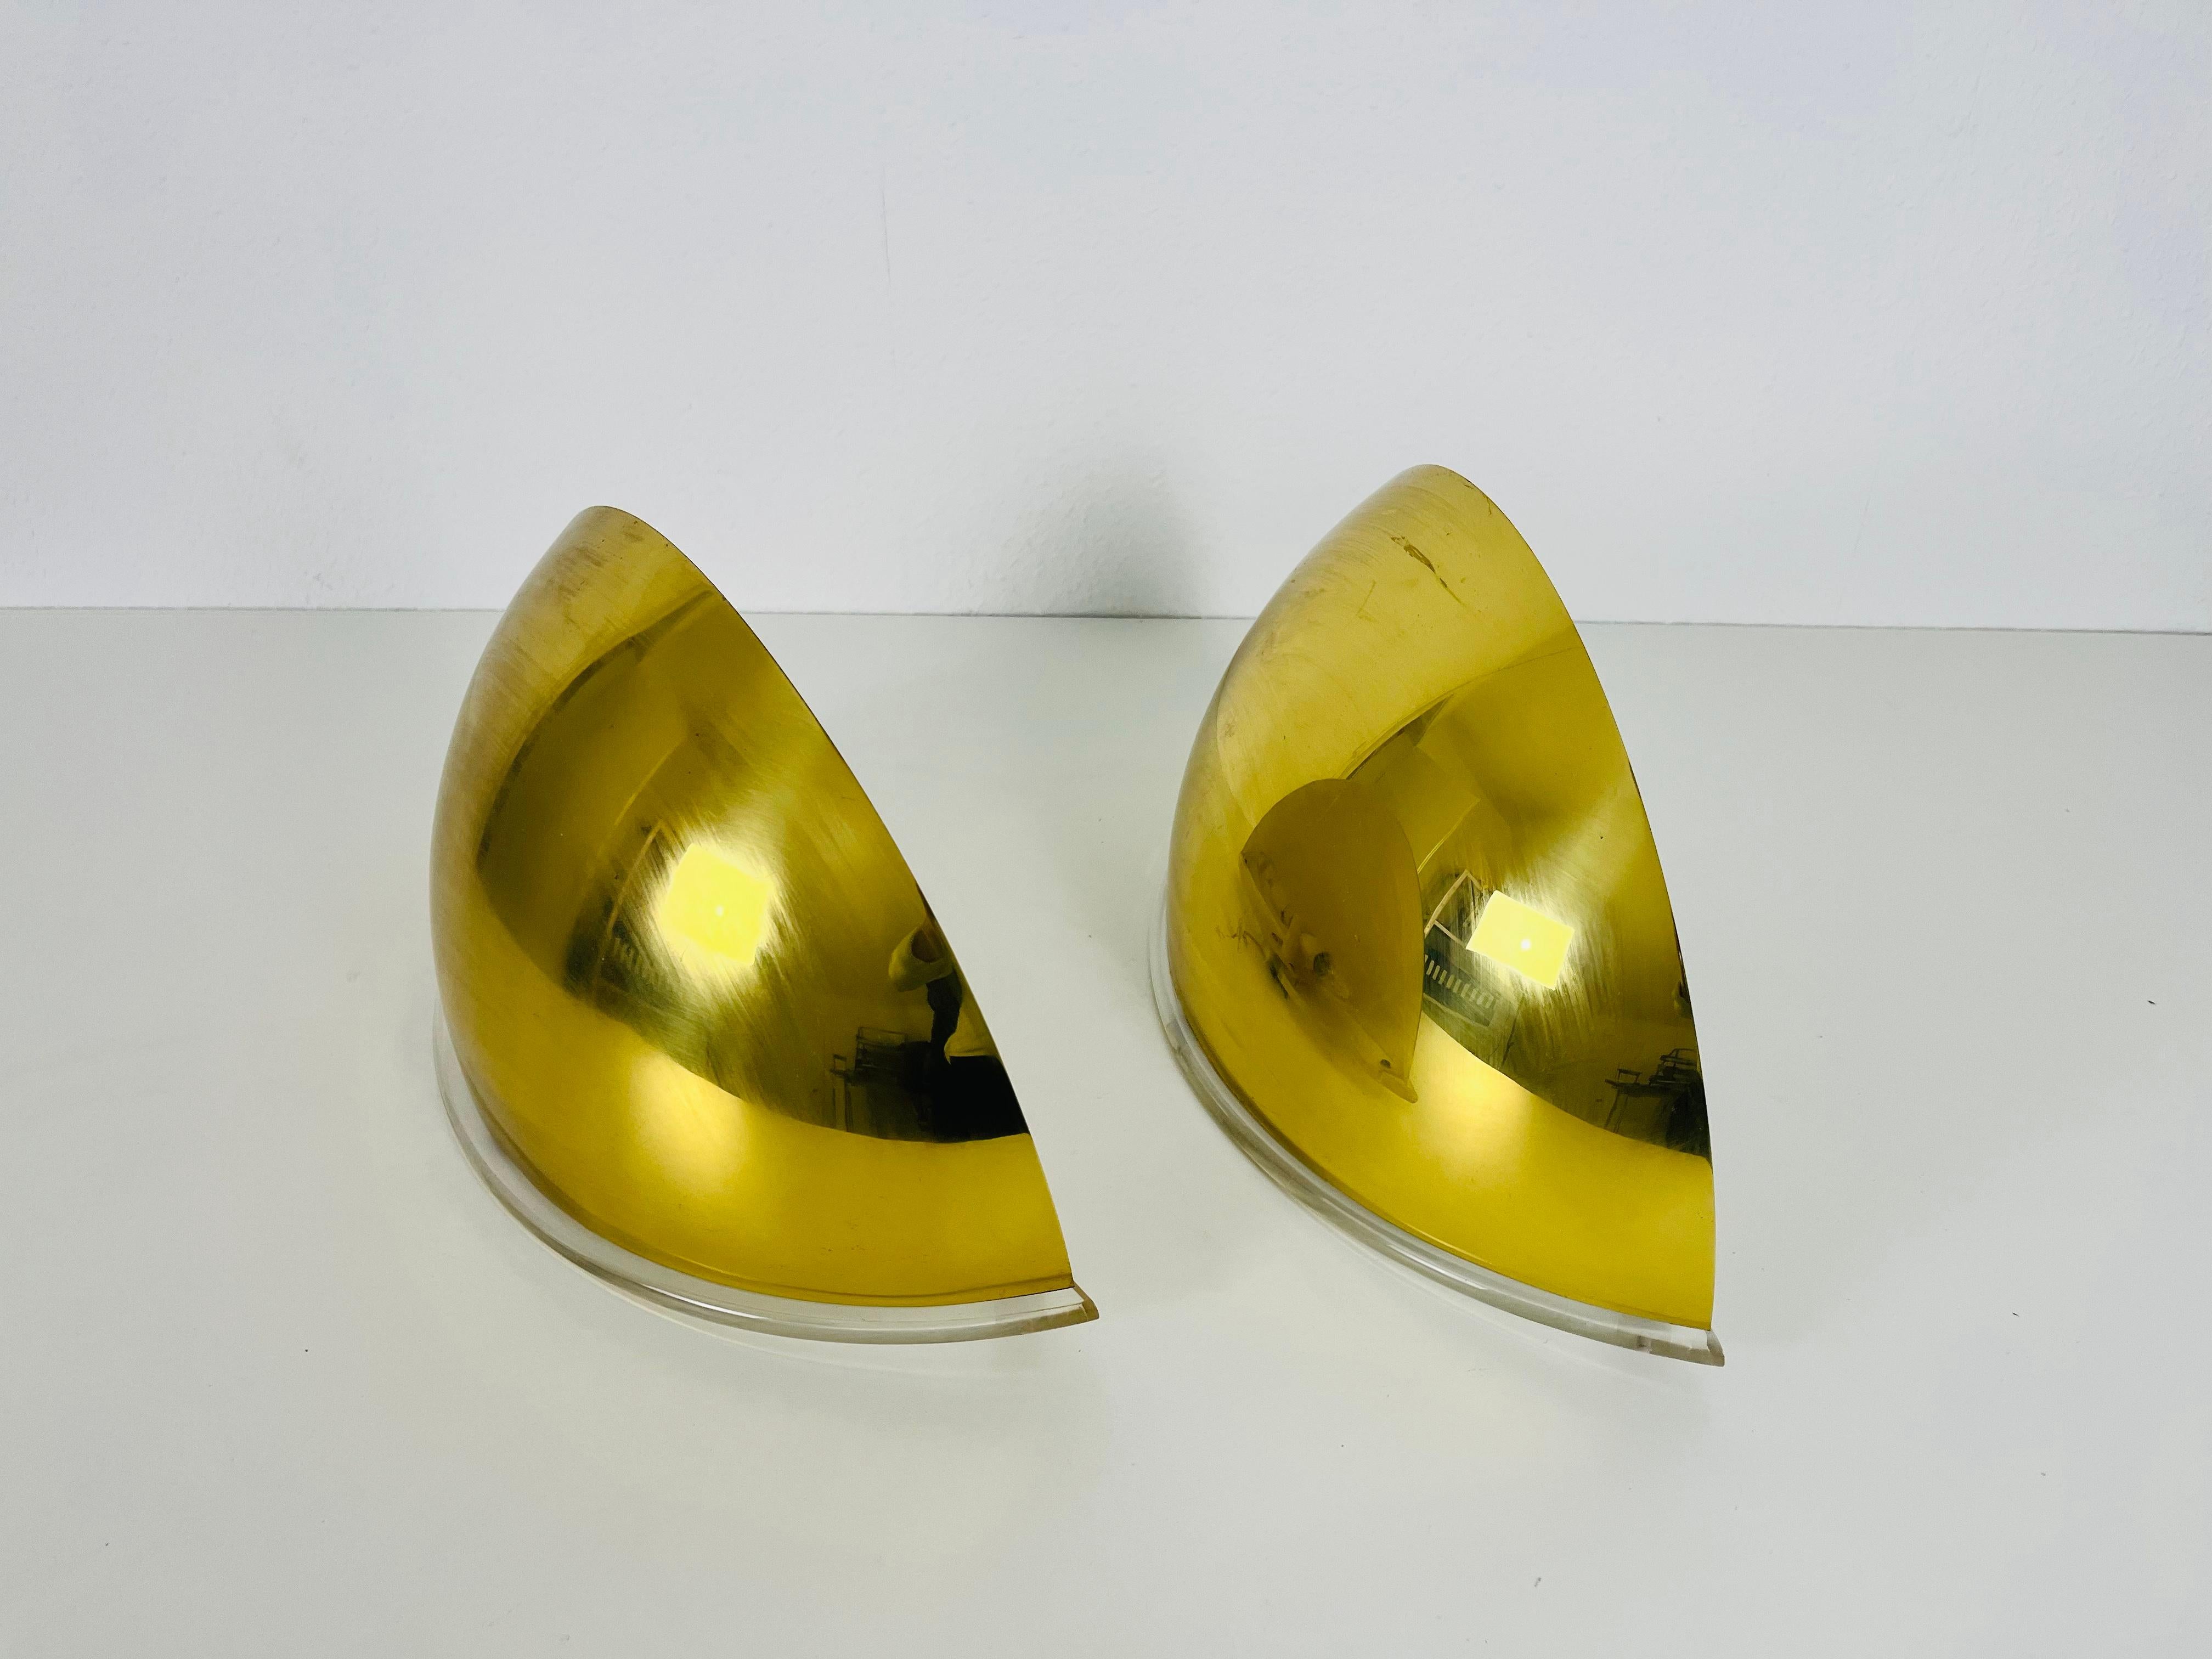 German Pair of Florian Schulz Midcentury Brass Wall Lamps, 1970s For Sale